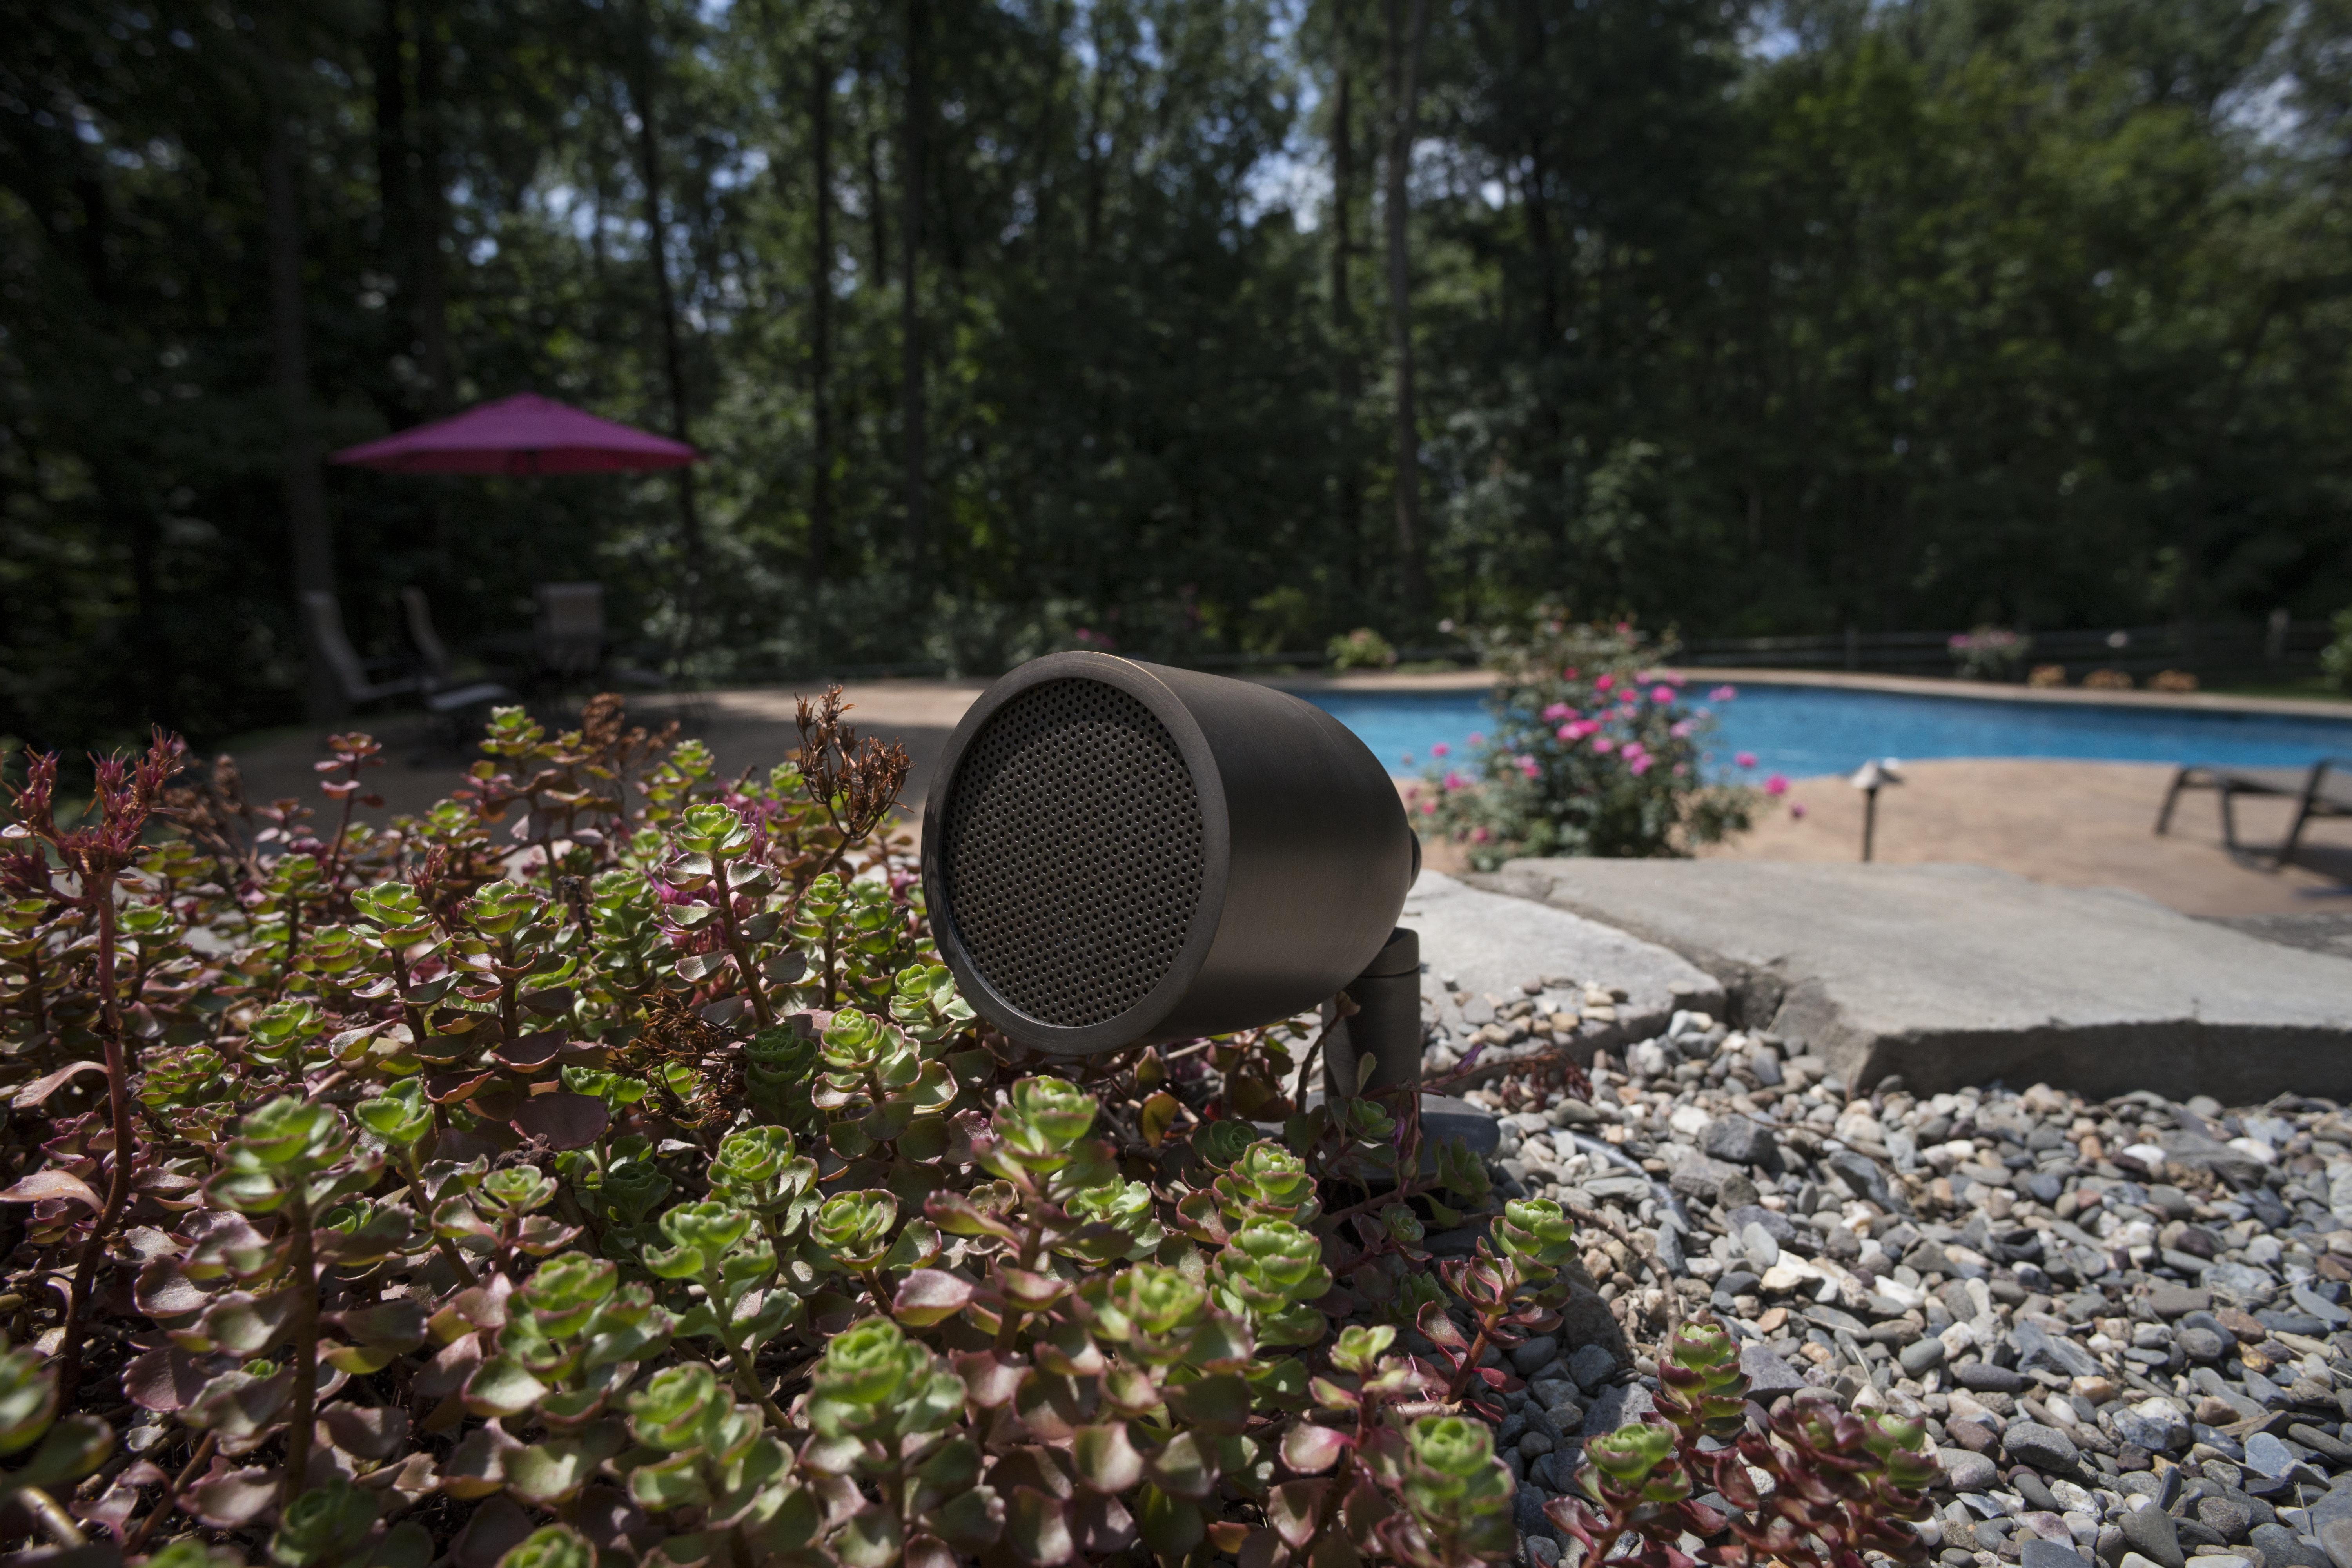 Closeup of a poolside speaker placed in a rockbed